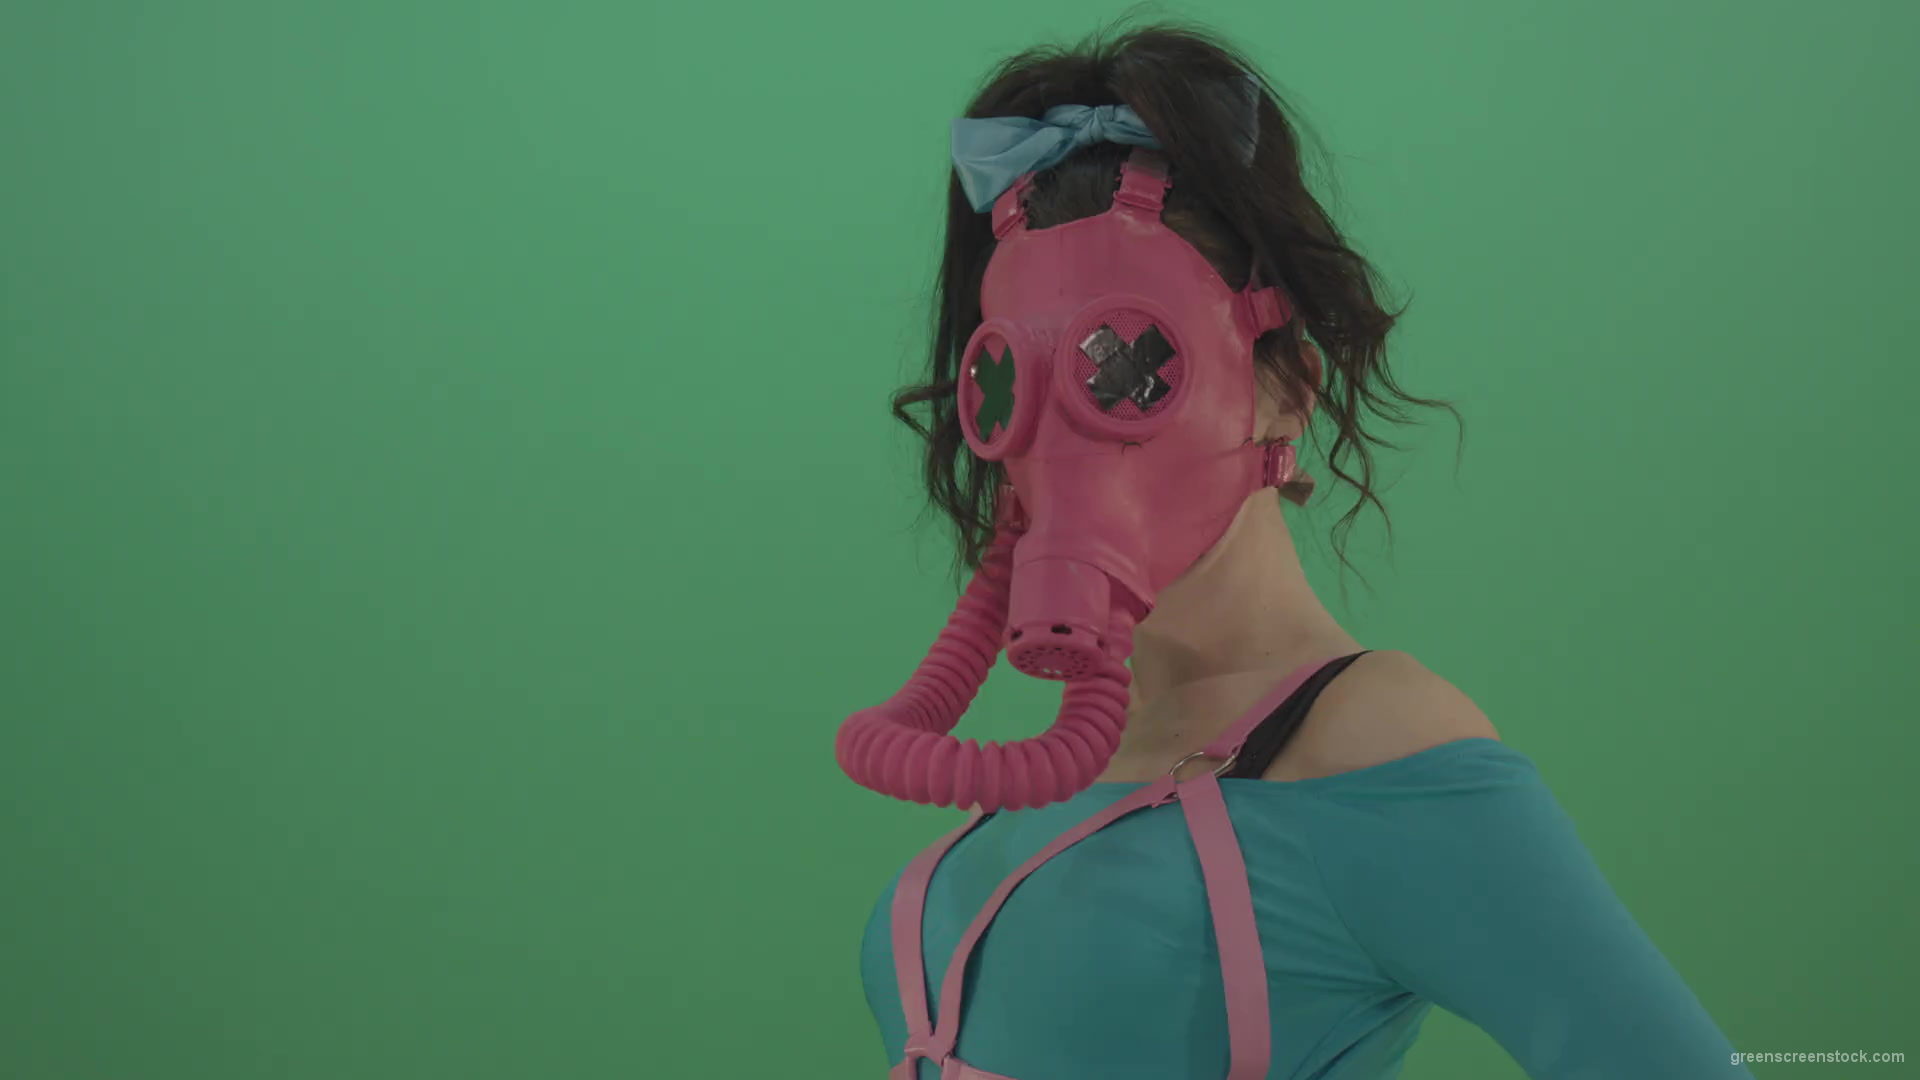 Pink-head-in-Gas-Mask-moving-Go-Go-Dance-isolated-on-green-screen-4K-Video-Footage-1920_001 Green Screen Stock